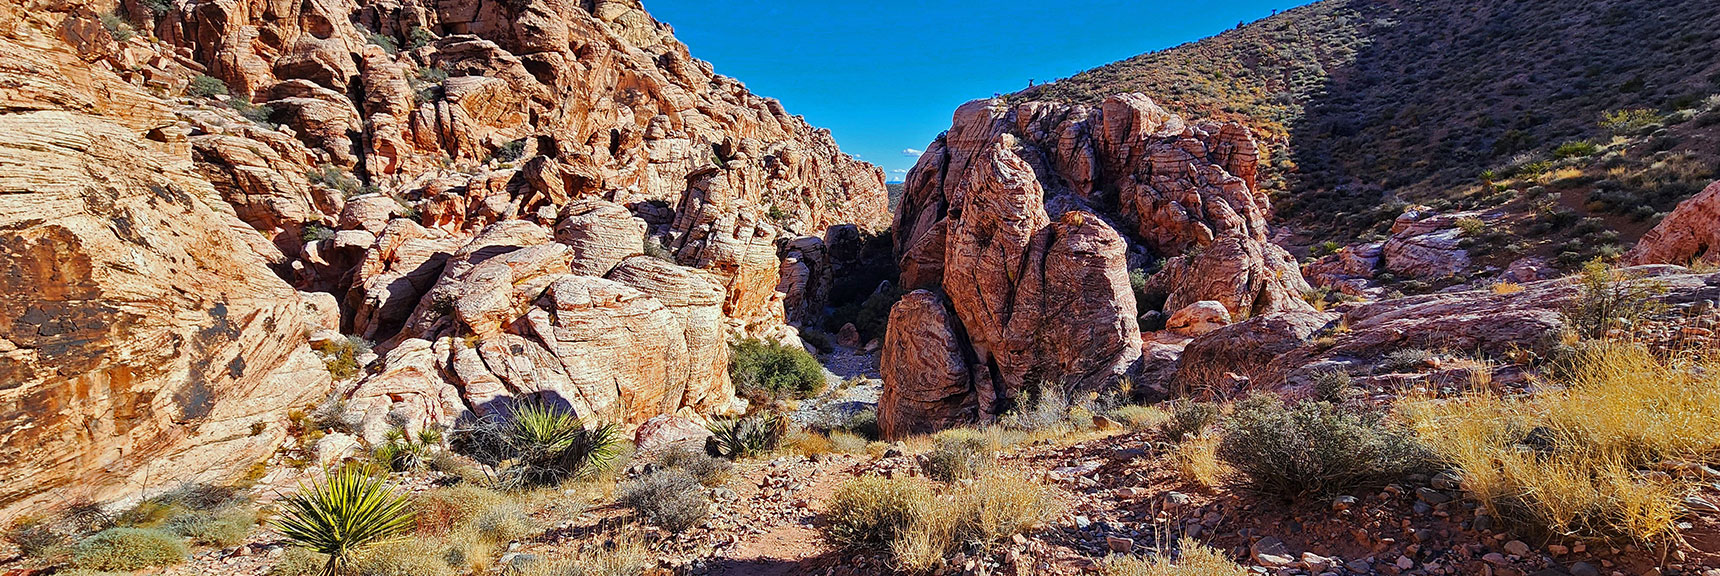 Now on Lower Calico Hills Trail. Can Choose Higher Trail to Right or Canyon Wash Below | Lower Calico Hills Loop | Calico Basin & Red Rock Canyon, Nevada